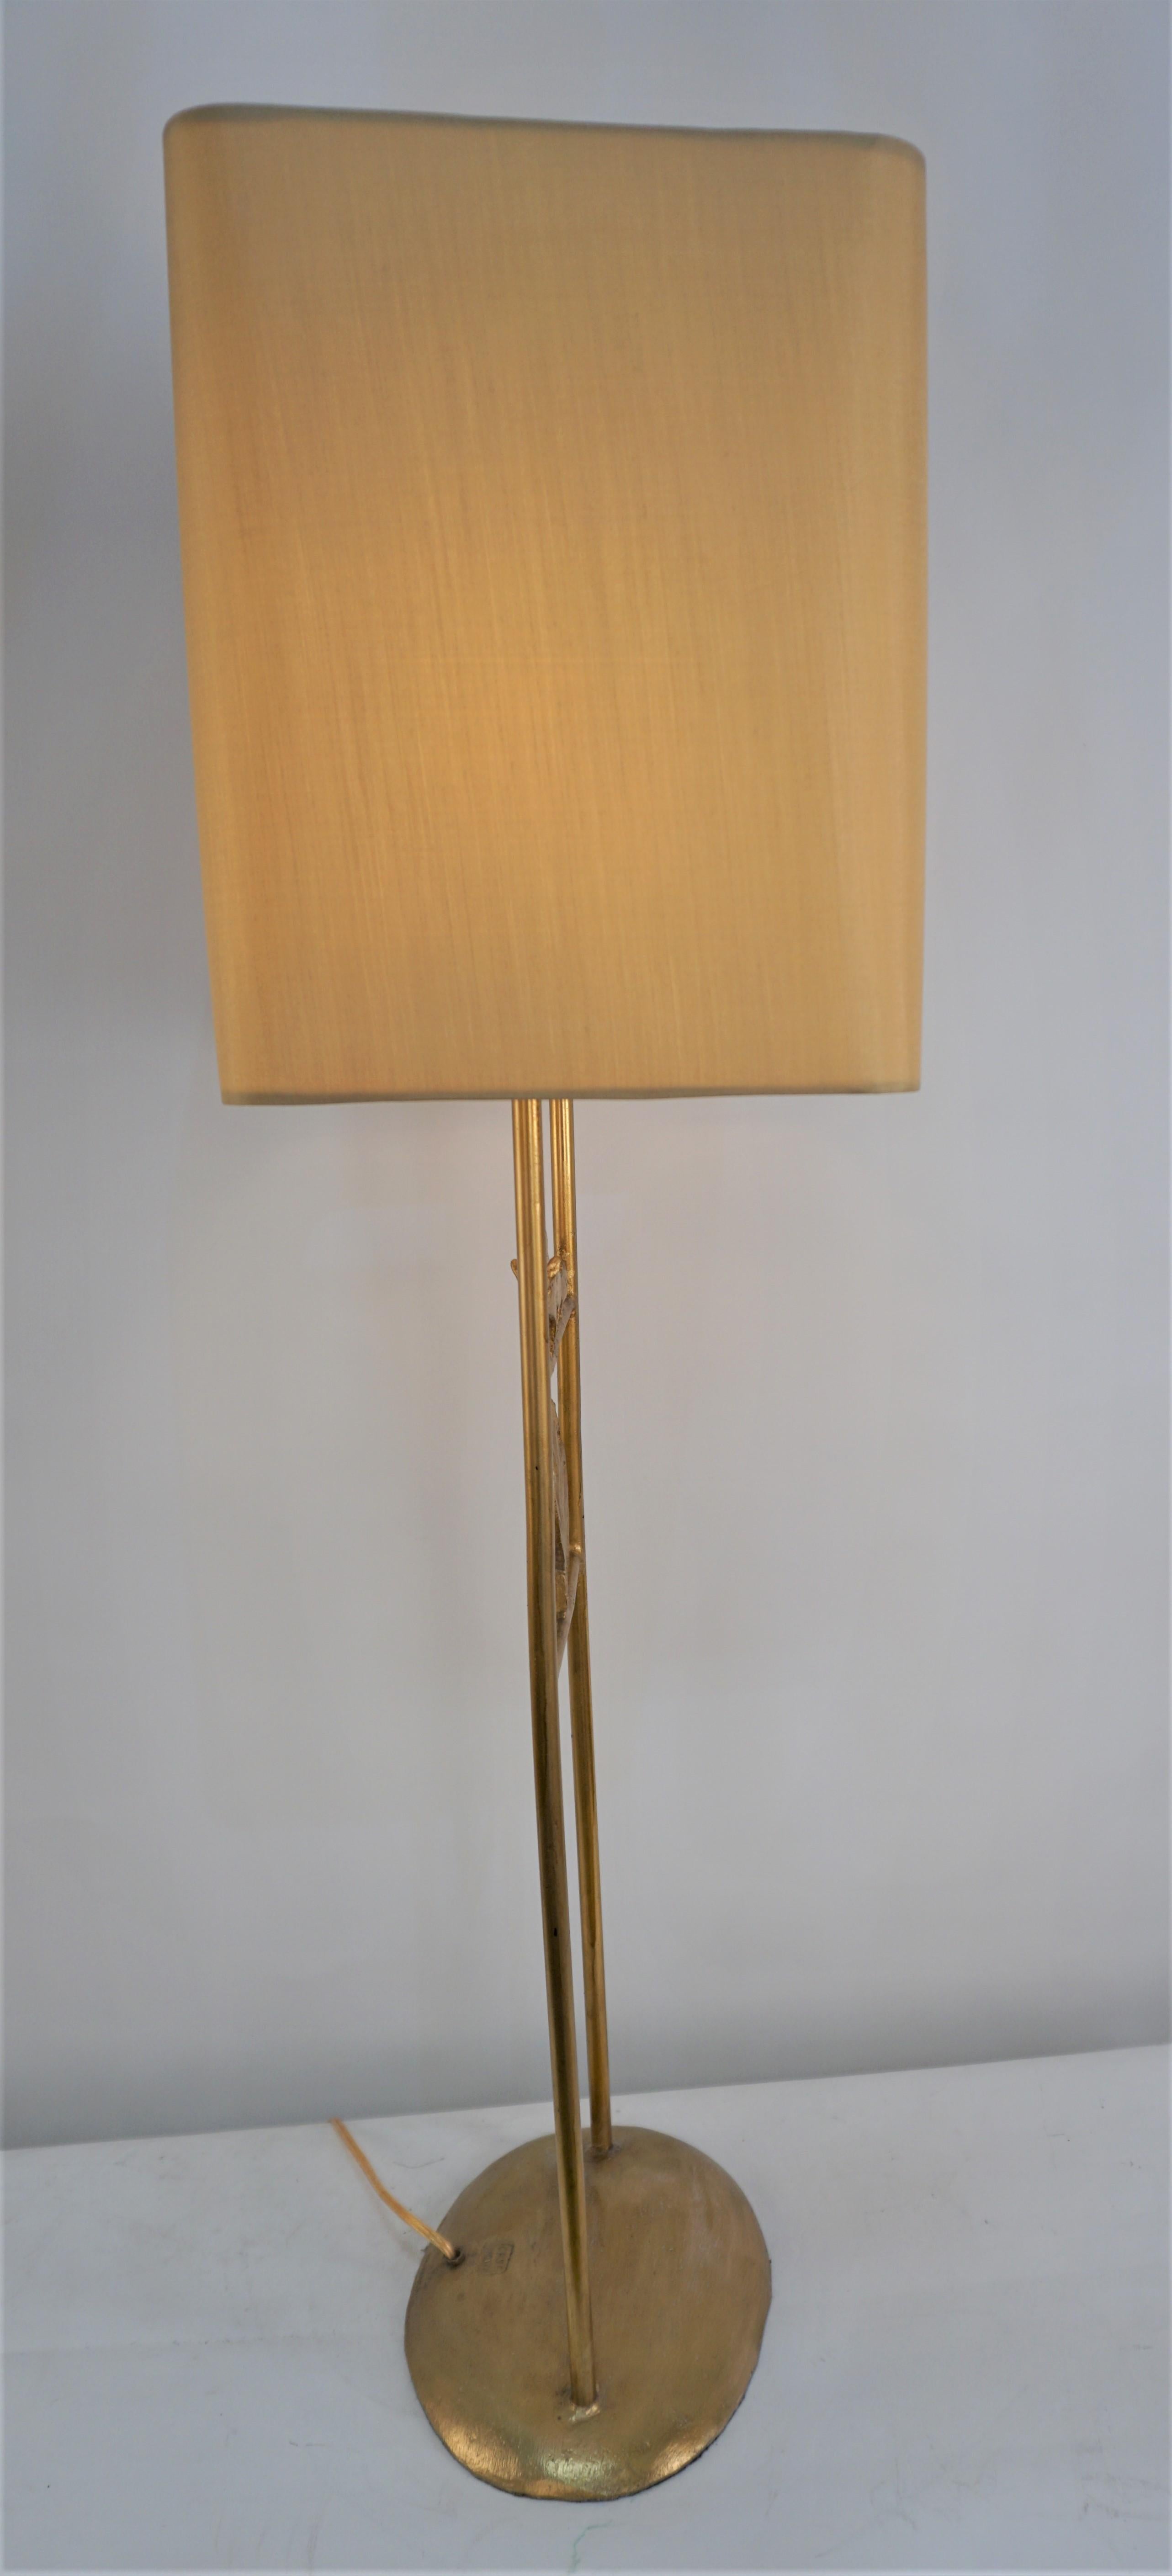 Pierre Casenove for Fondica Gilt Metal 1990 Table Lamp For Sale 1